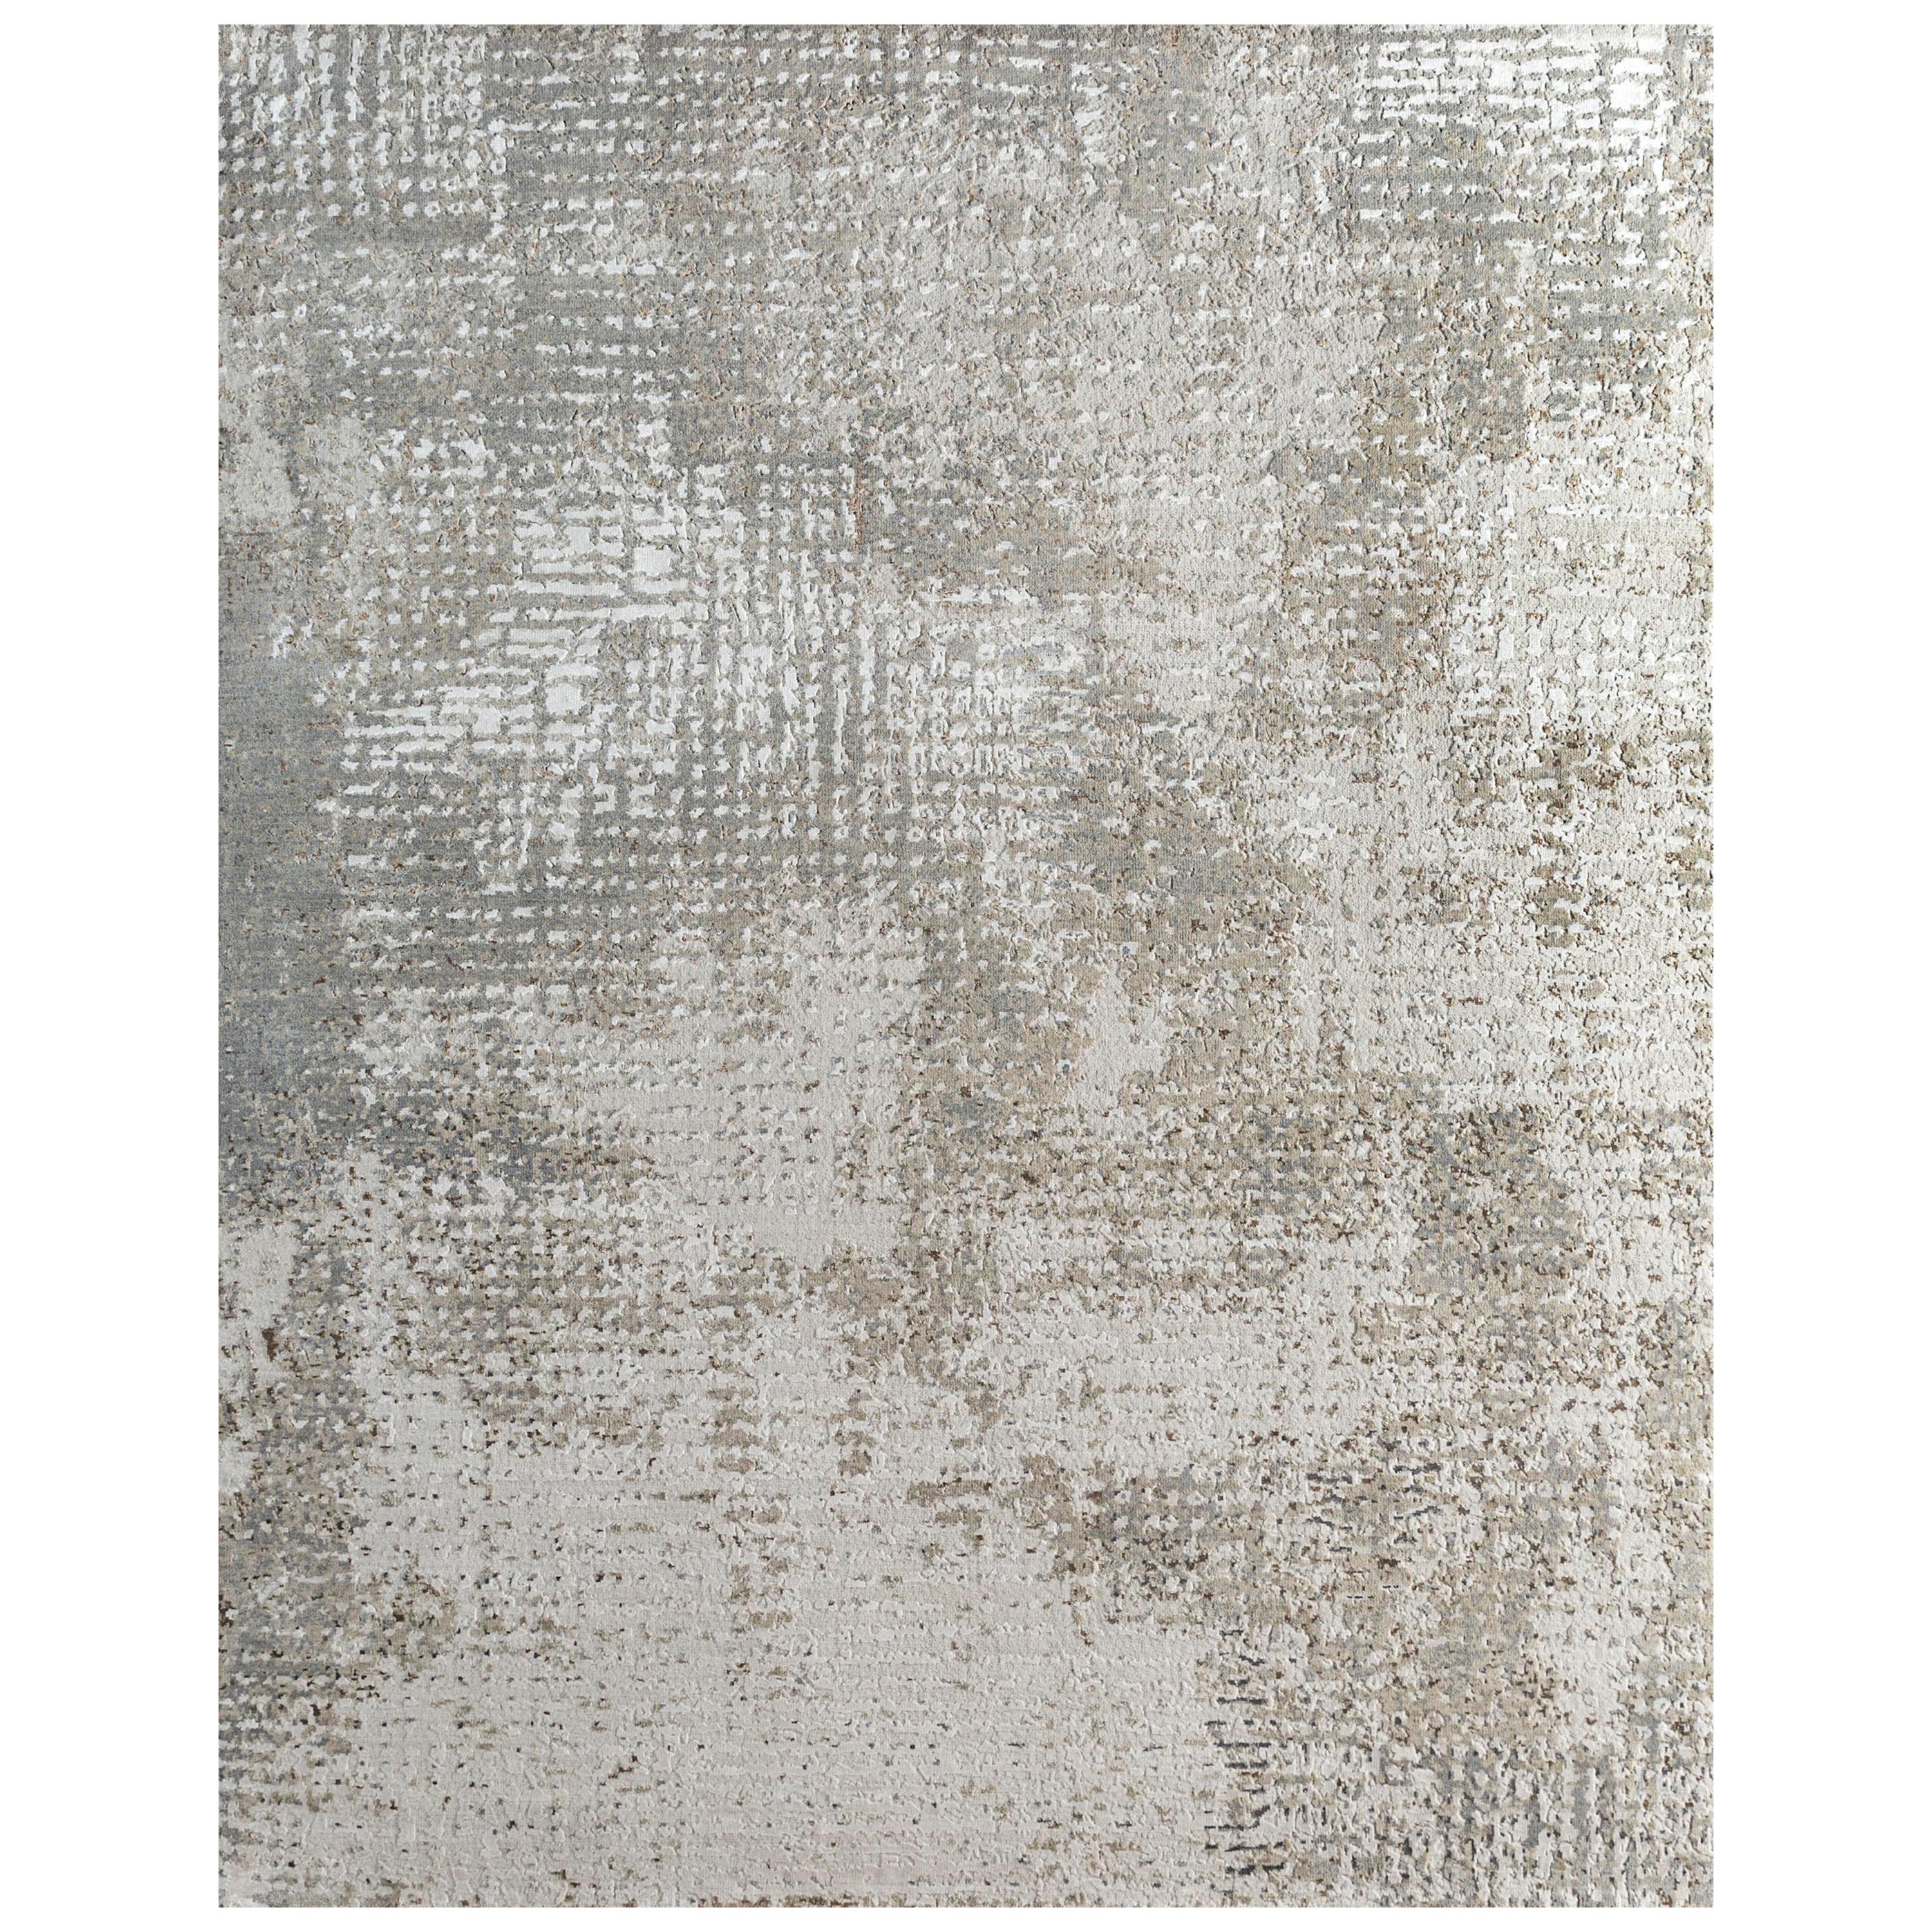  Ashwood Rug by Rural Weavers, Knotted, Wool, Bamboo Silk, 240x300cm For Sale